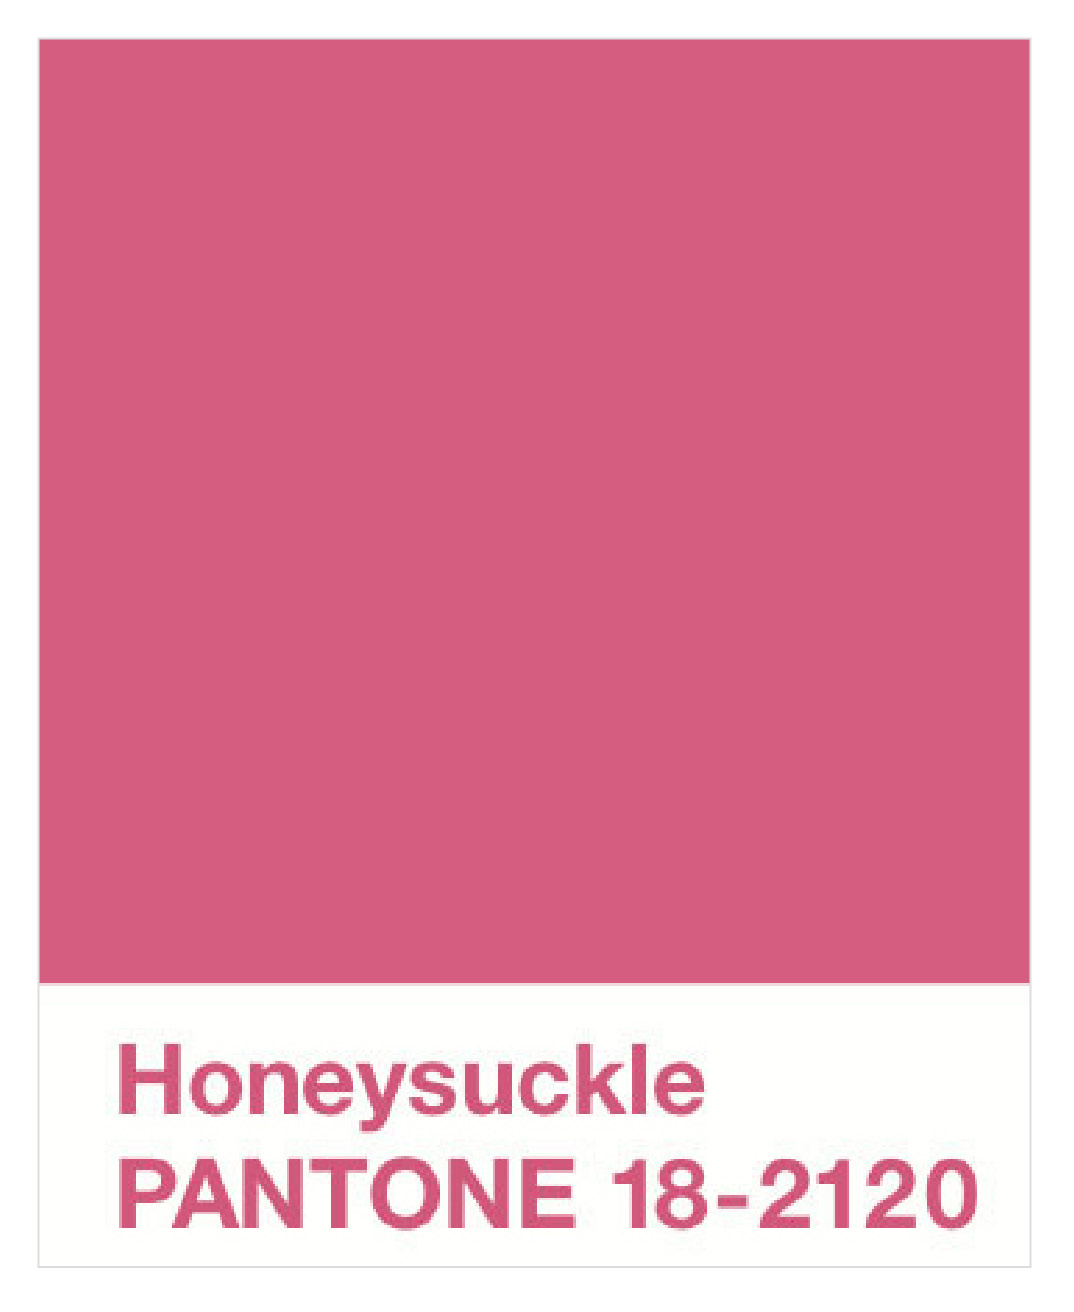 creative | outlet: 2011 | pantone color of the year